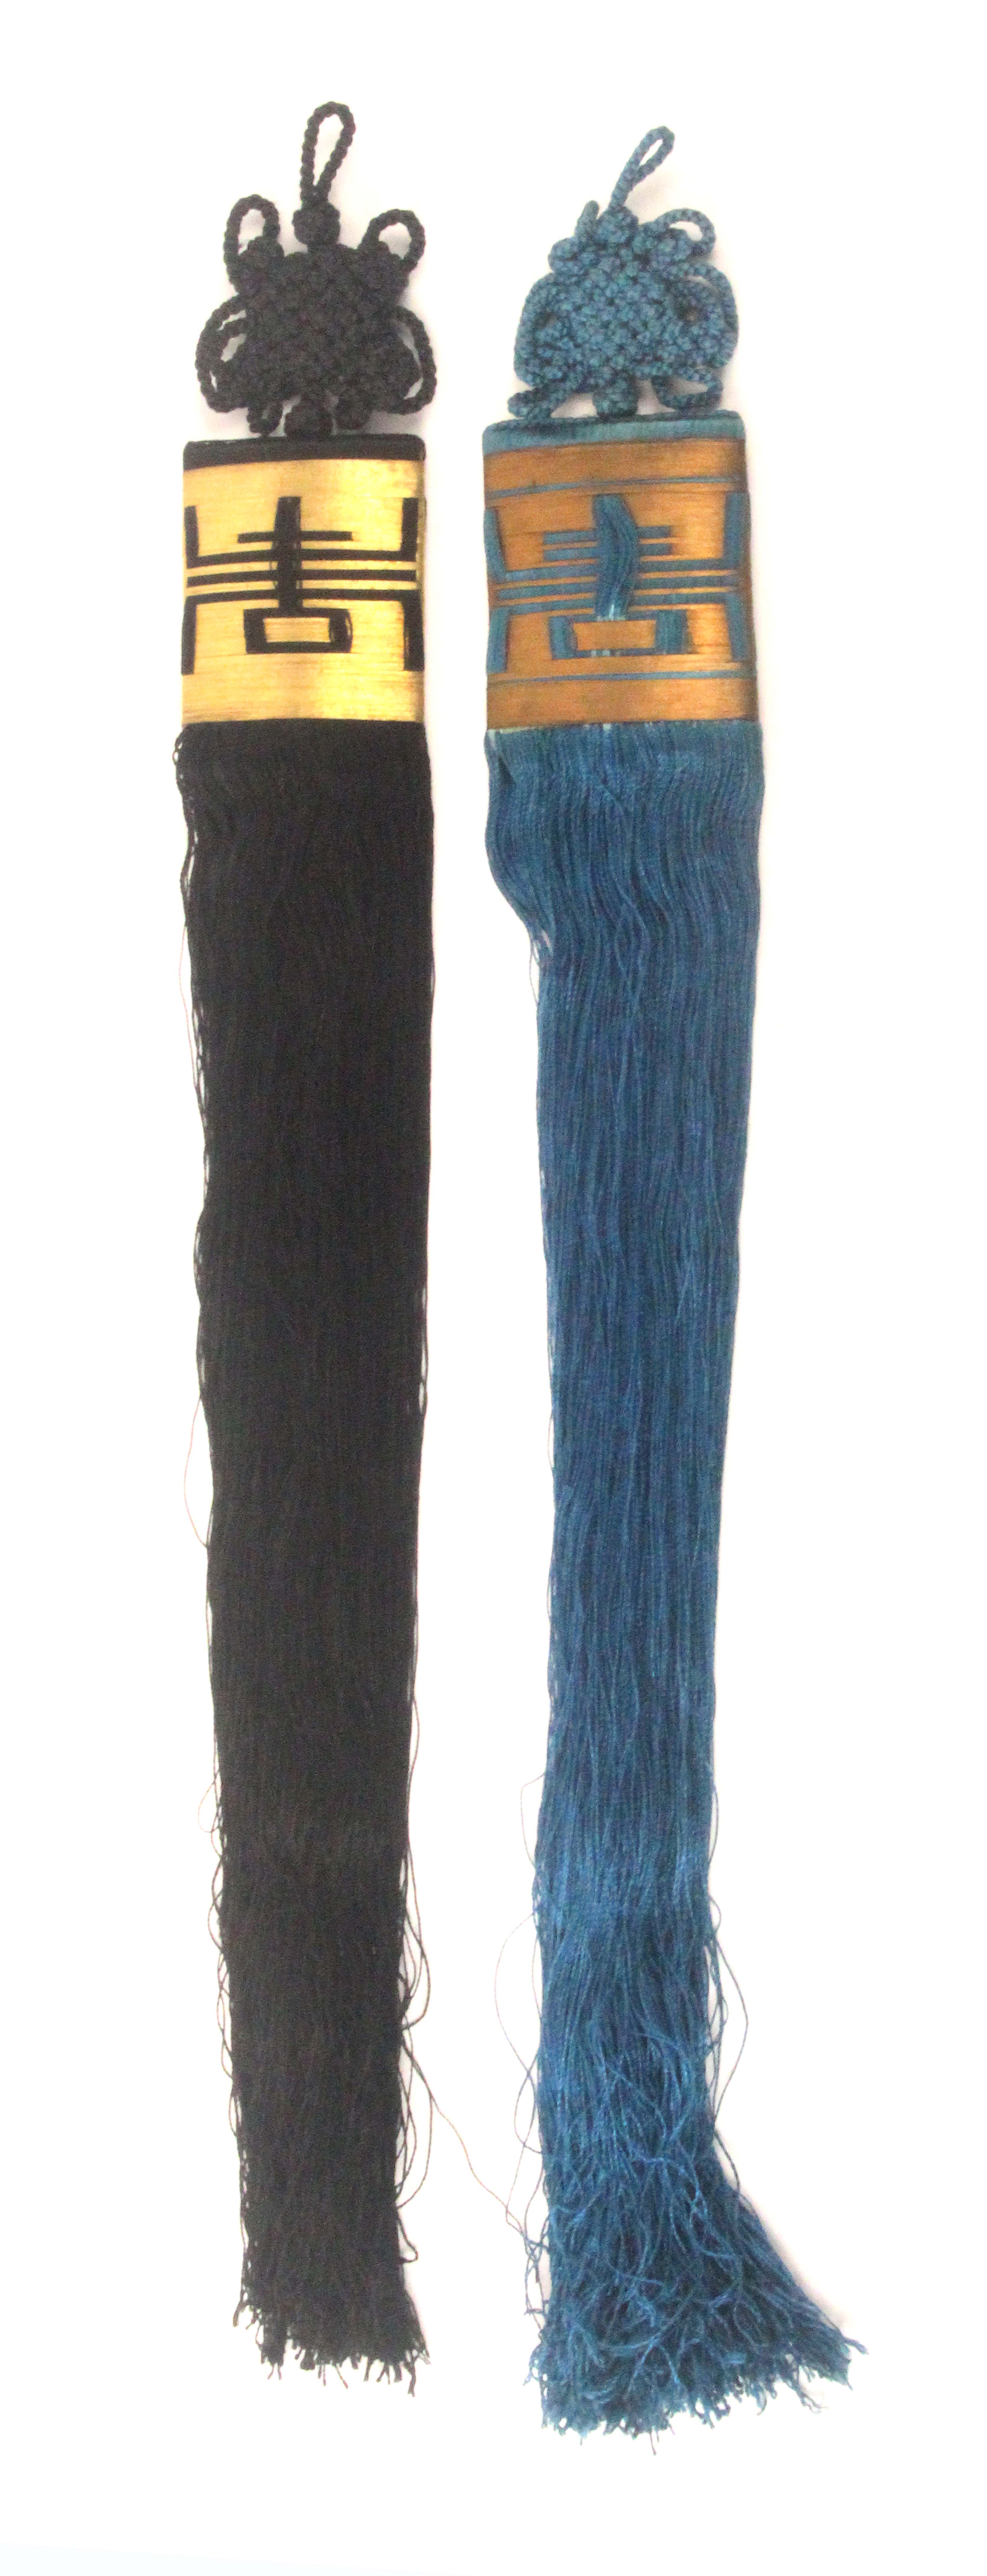 A pair of Chinese tassels, late 19th / early 20th Century, one in black, one in blue, gilt thread